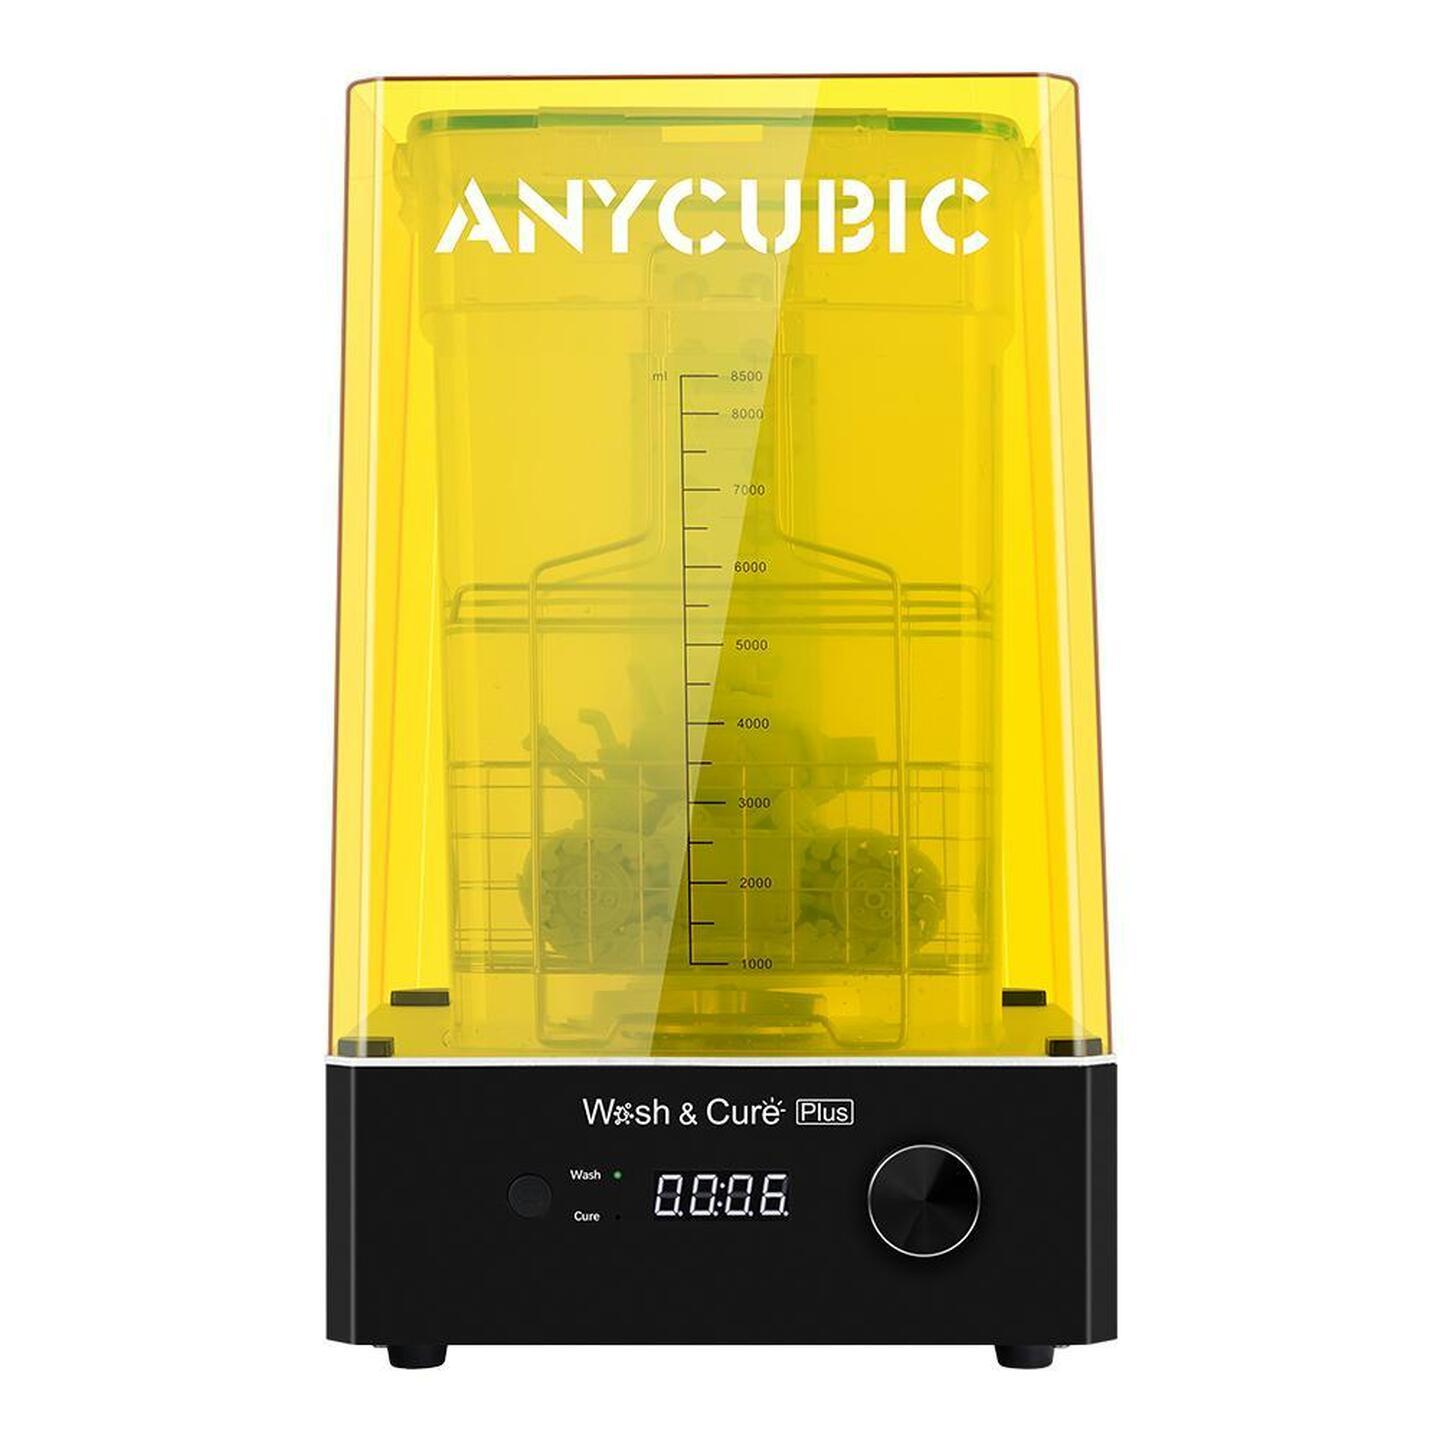 Anycubic Wash and Cure Plus